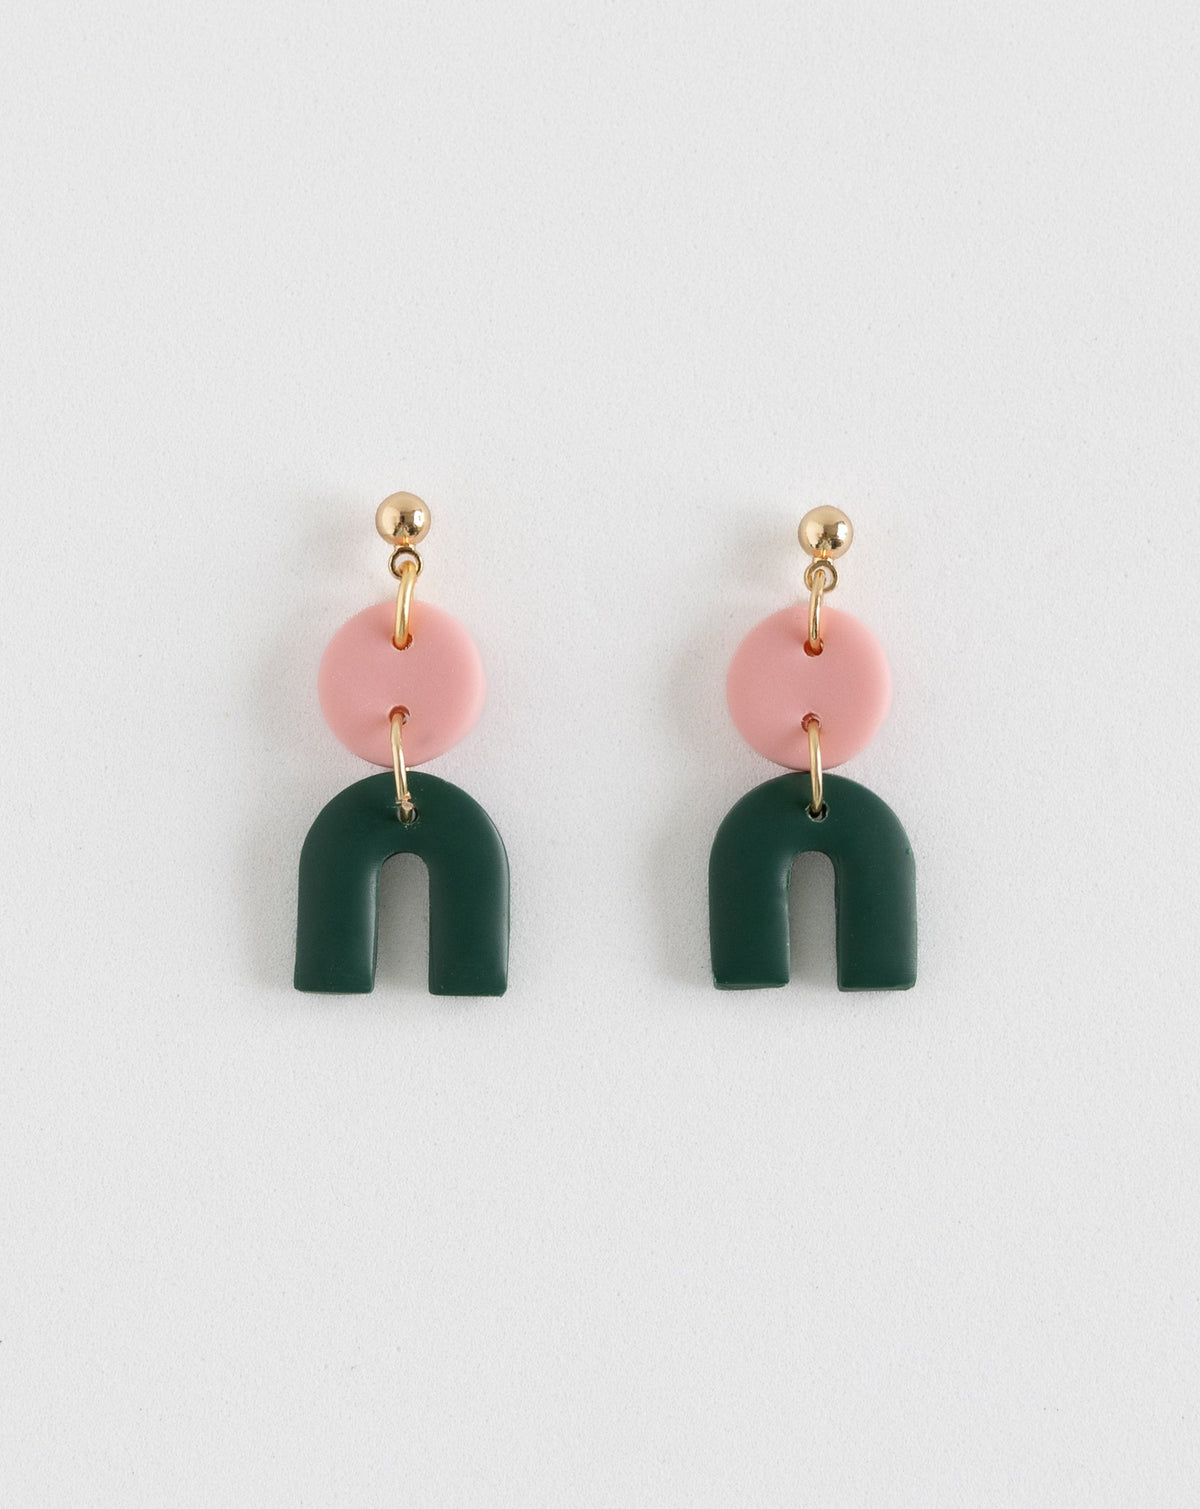 Tiny Arch earrings in two part of Sof pink and pine polymer clay parts with Gold plated Ball studs, front view.